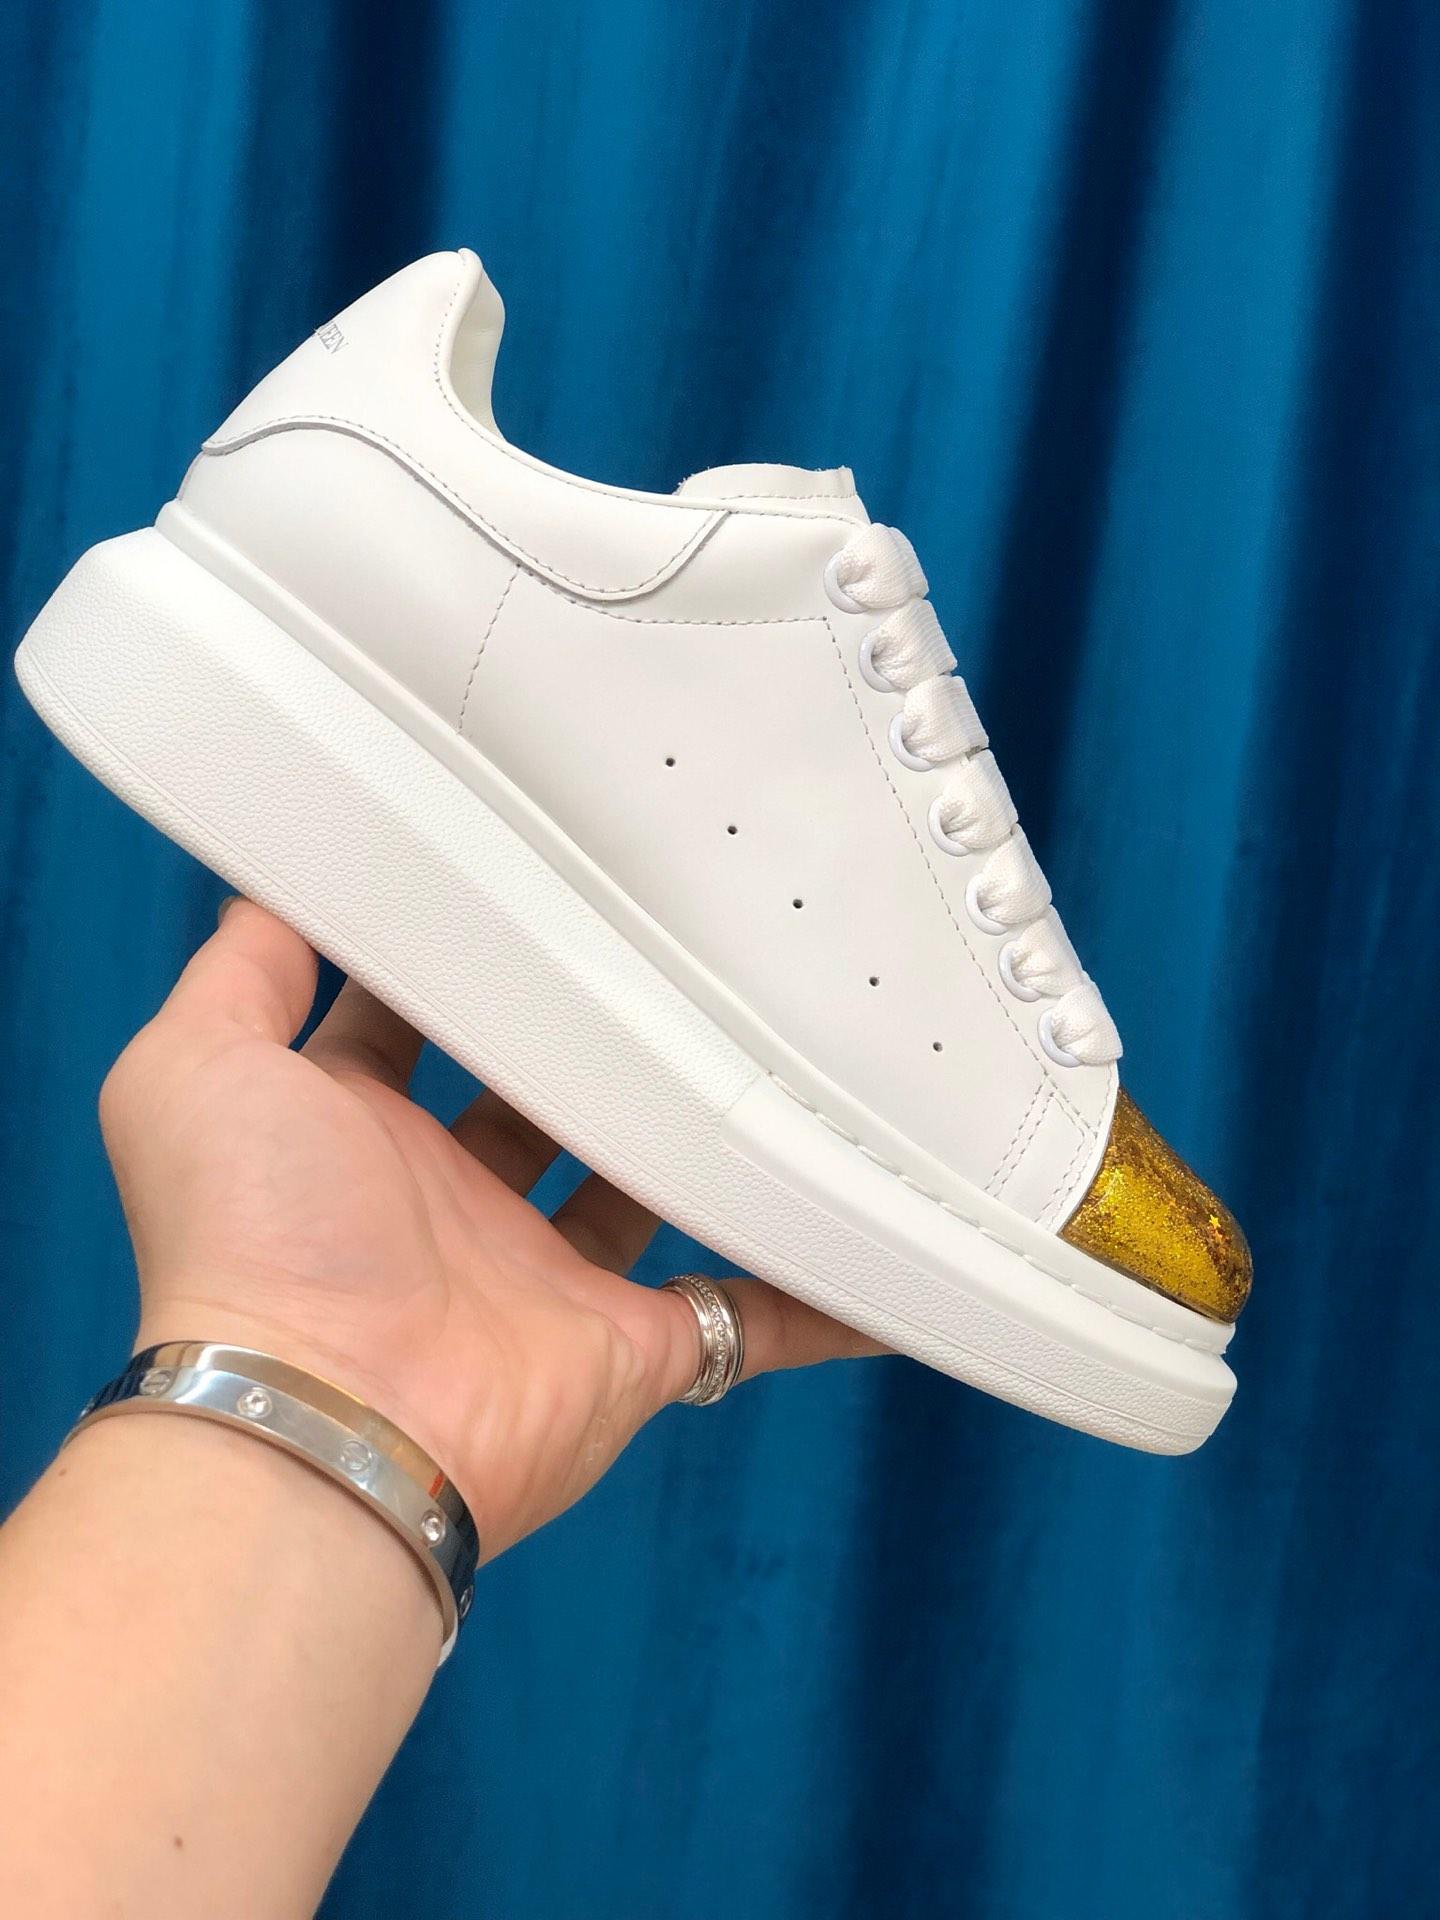 Alexander McQueen Fahion Sneakers White and gold toe MS100033